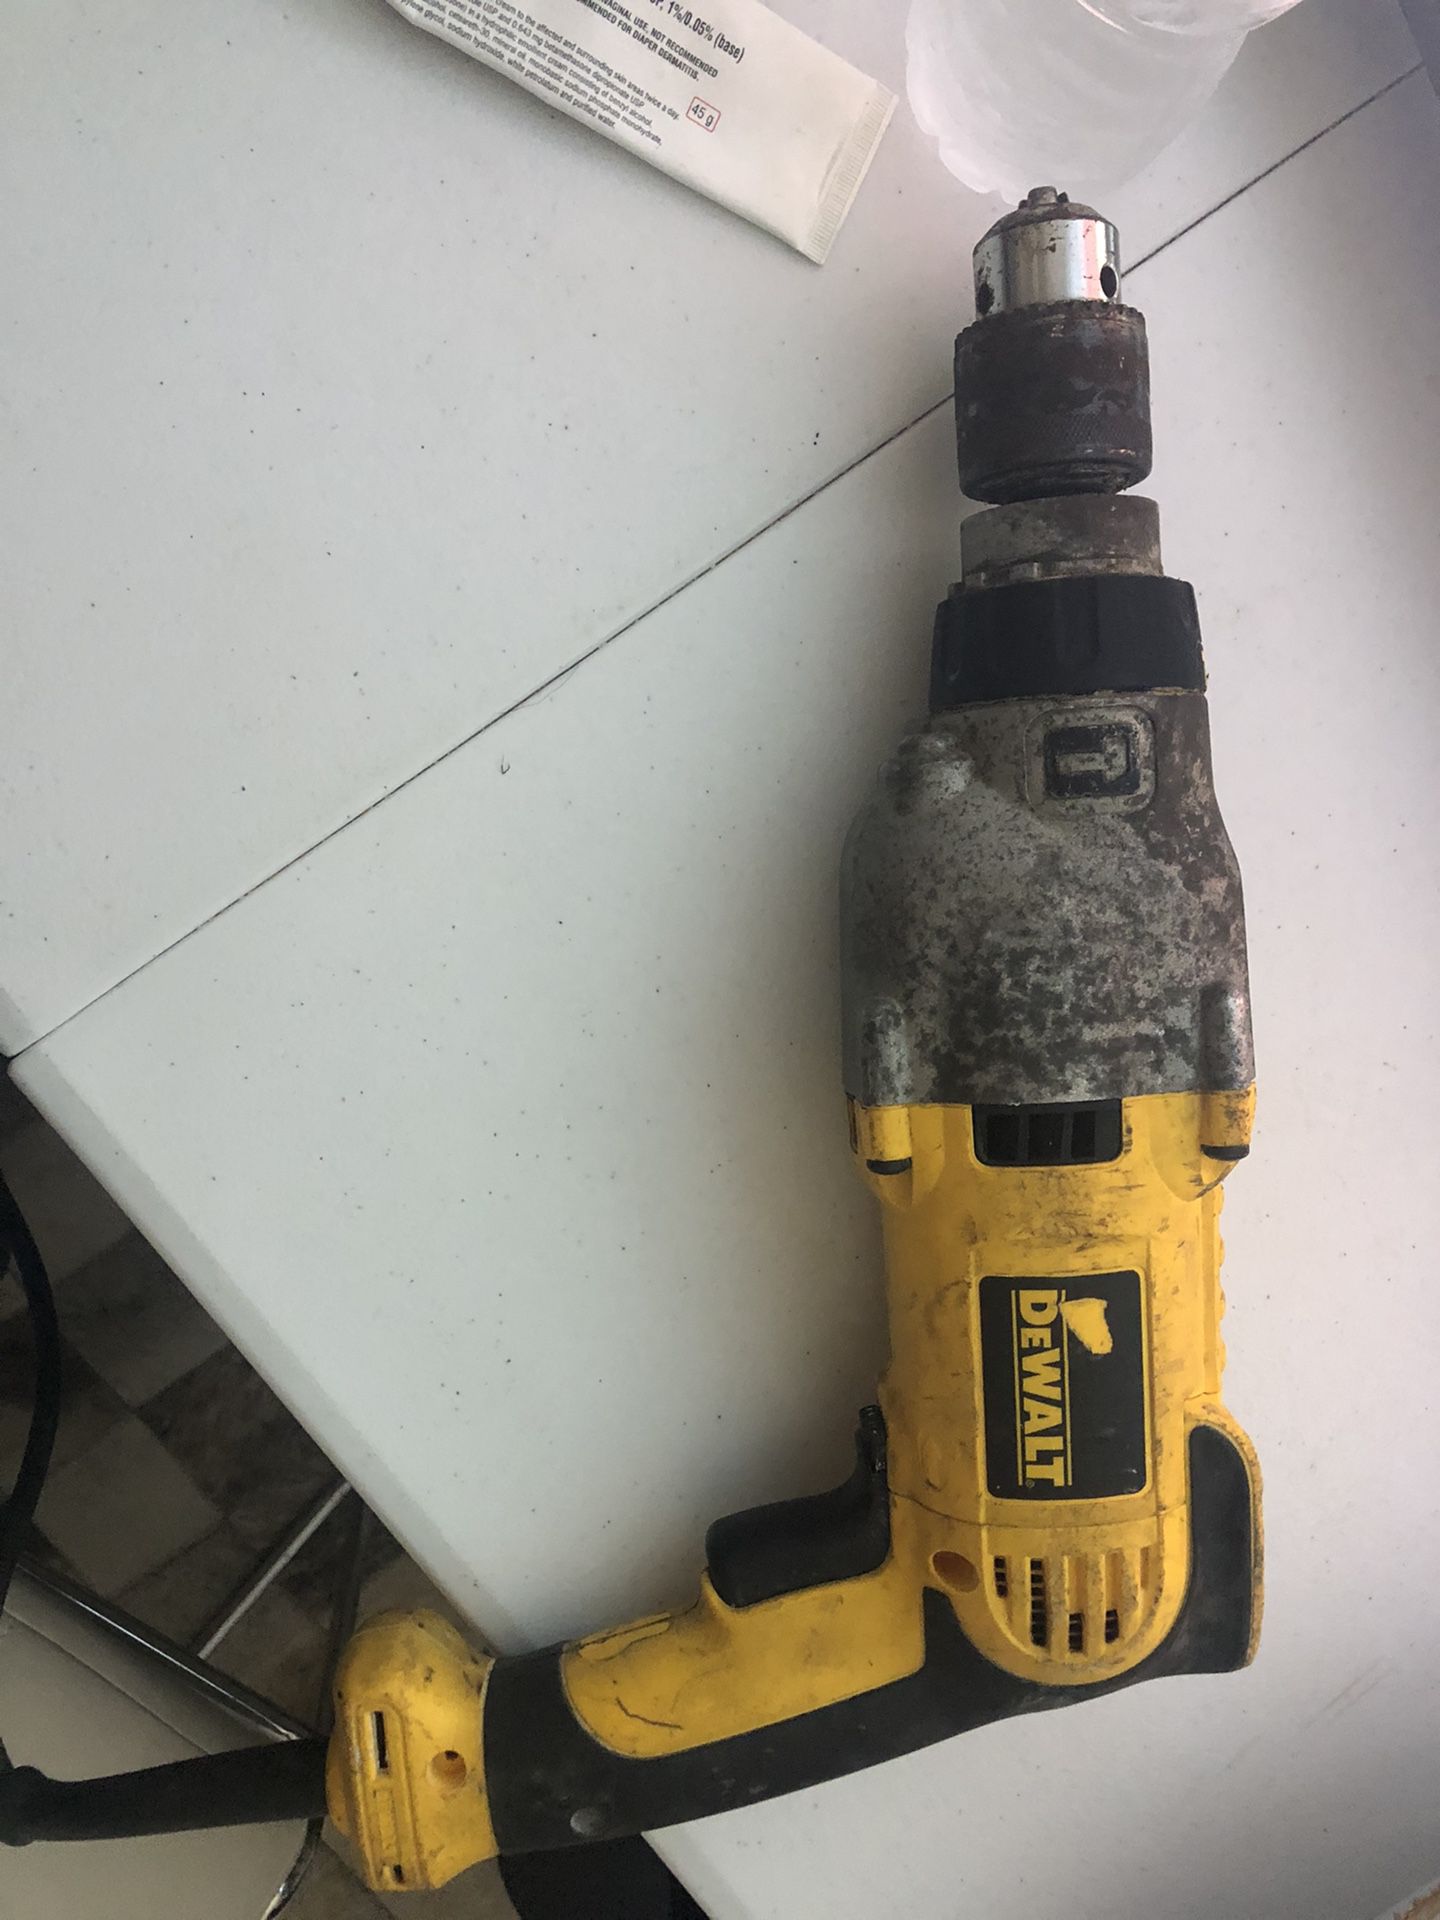 Drill Dewalt used but no working right now